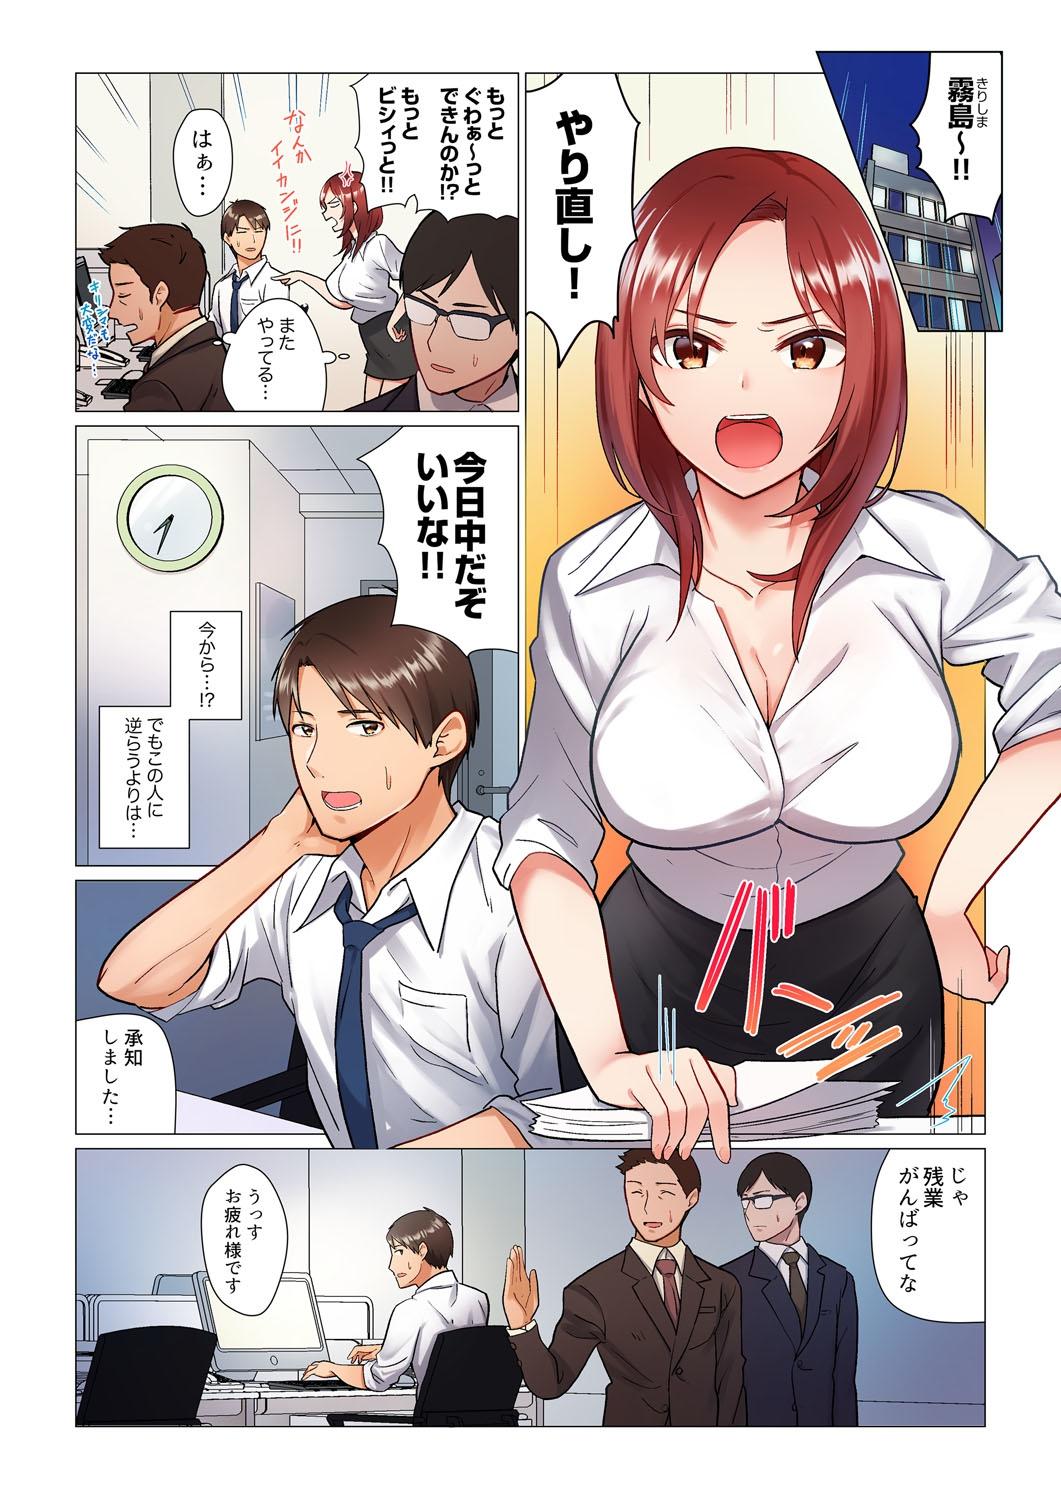 Rica 居眠り中の女上司にこっそり挿入（※寝たフリしながらイッてました）1-10 Young Old - Page 3